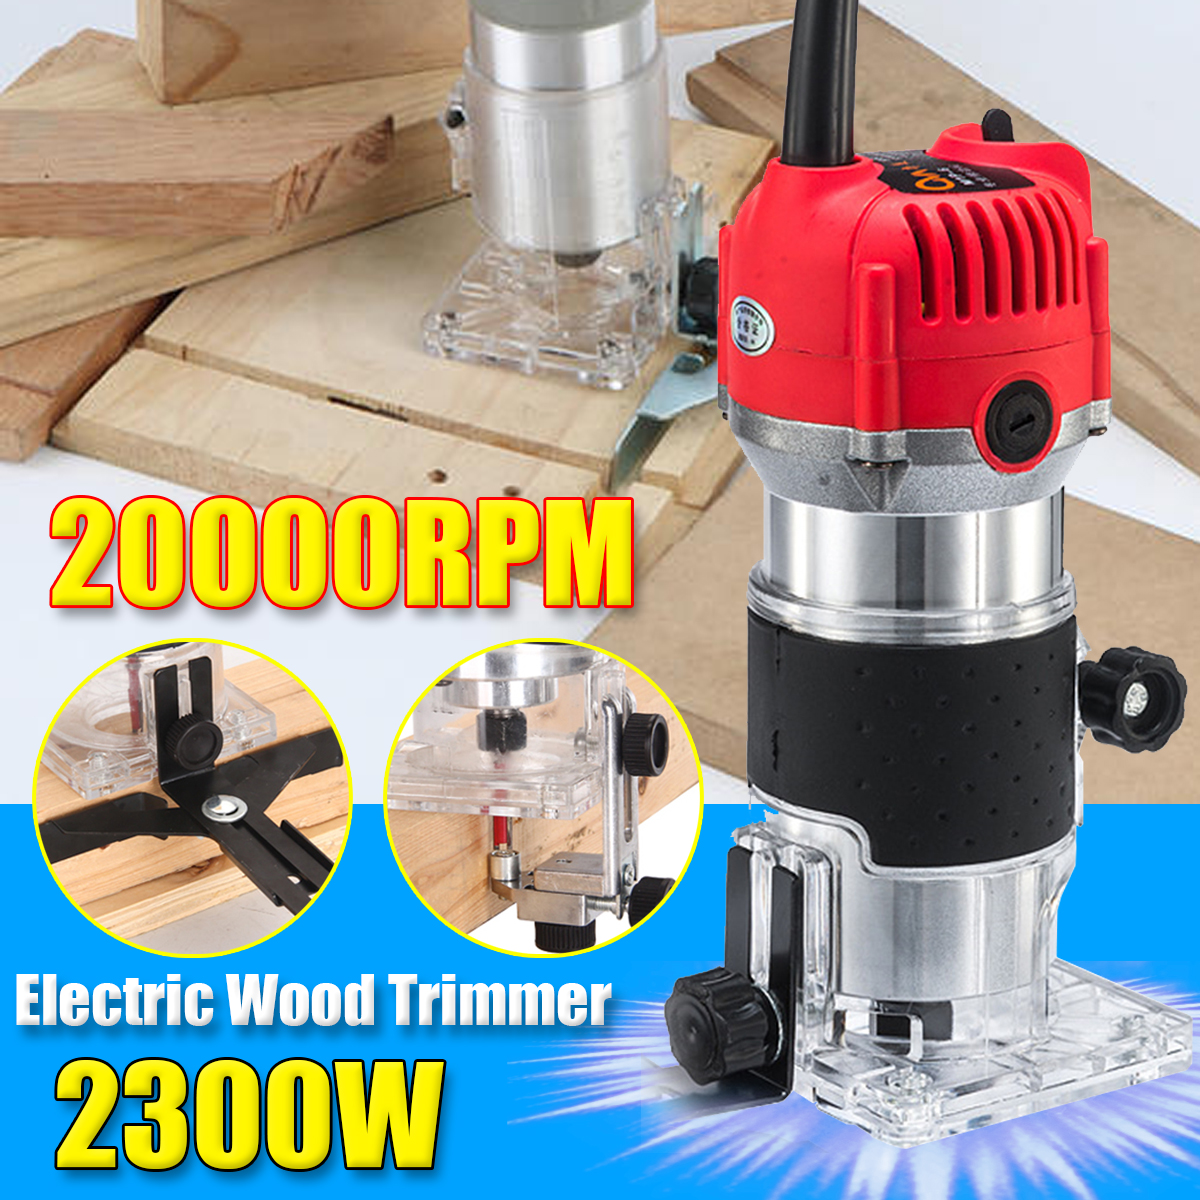 110V220V-20000rpm-Electric-Hand-Trimmer-Router-Wood-Laminate-Palm-Joiners-Working-Cutting-Tool-1821827-1